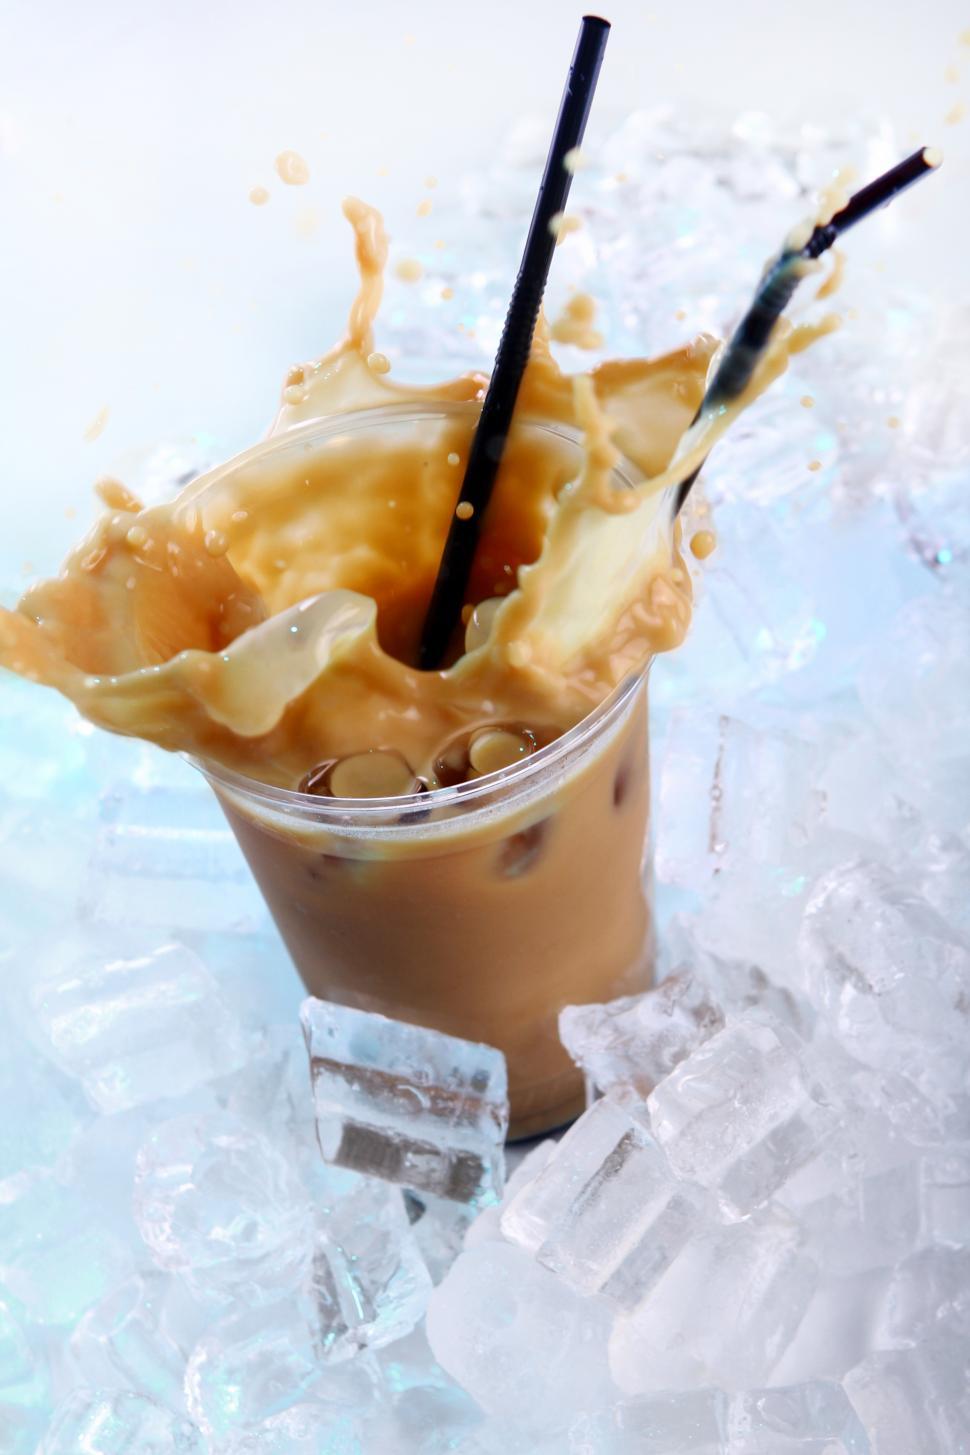 Free Image of Cold coffee drink with ice splashes 